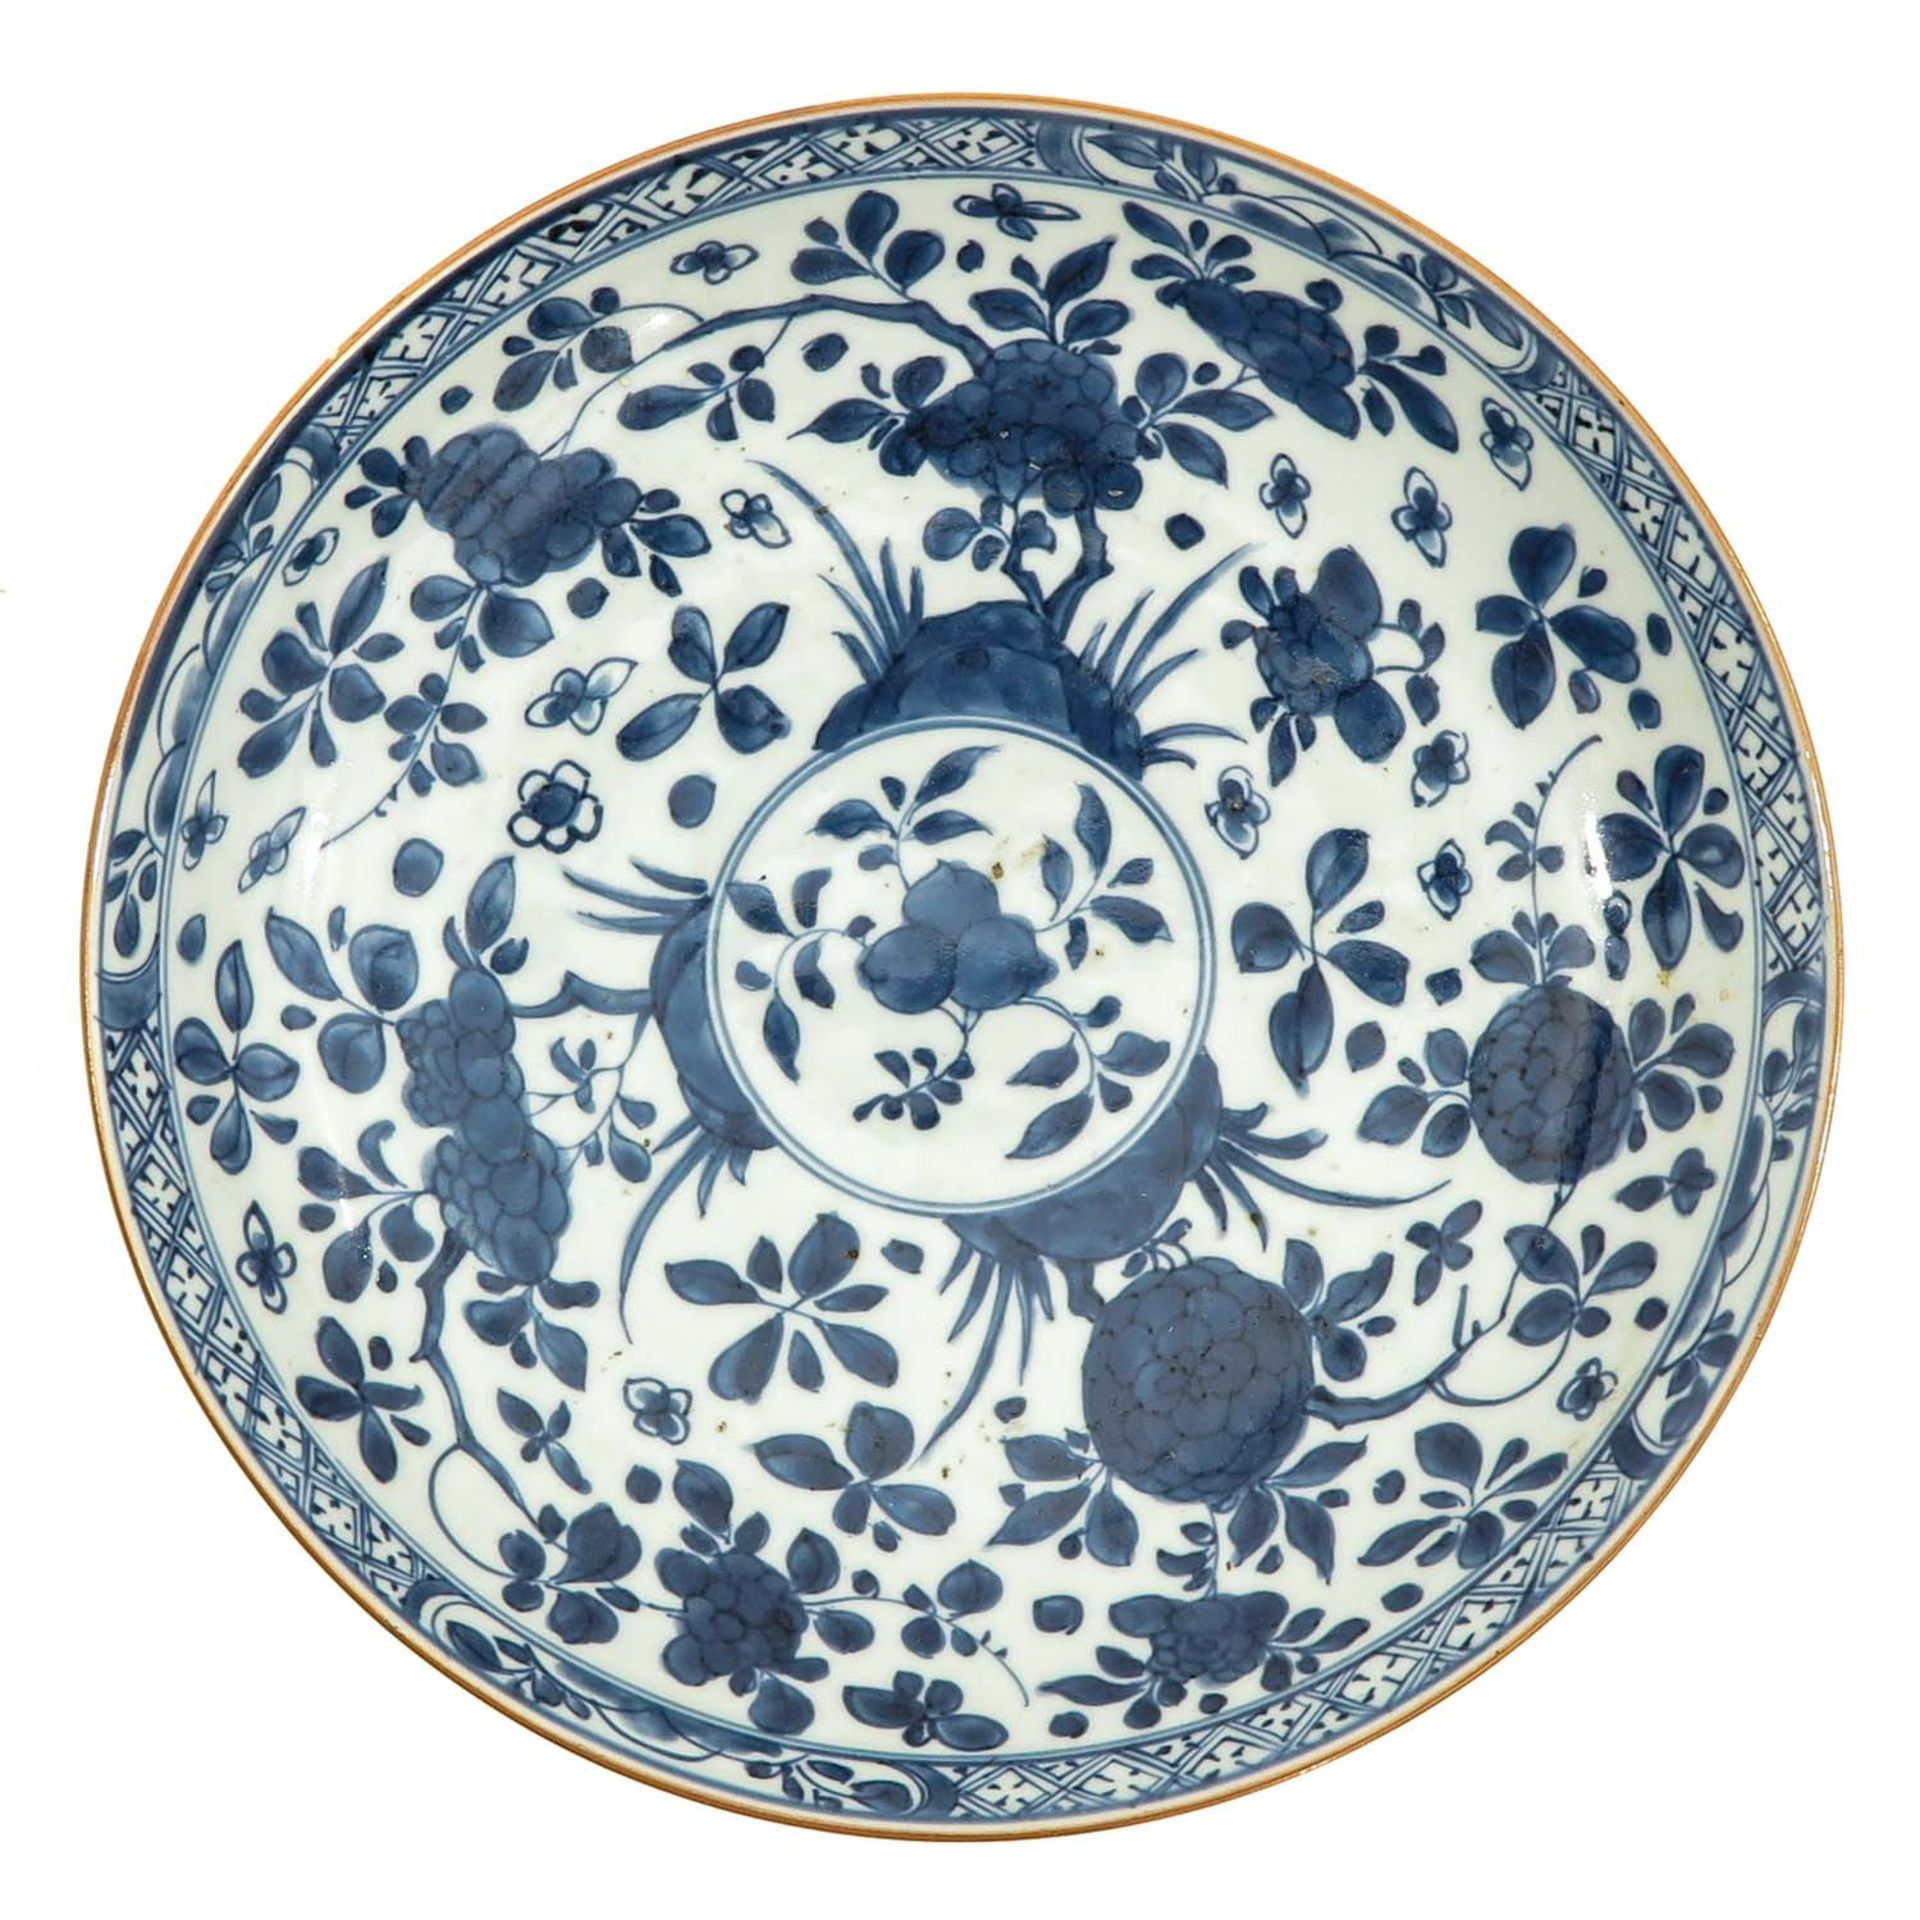 A Pair of Blue and White Plates - Image 5 of 9